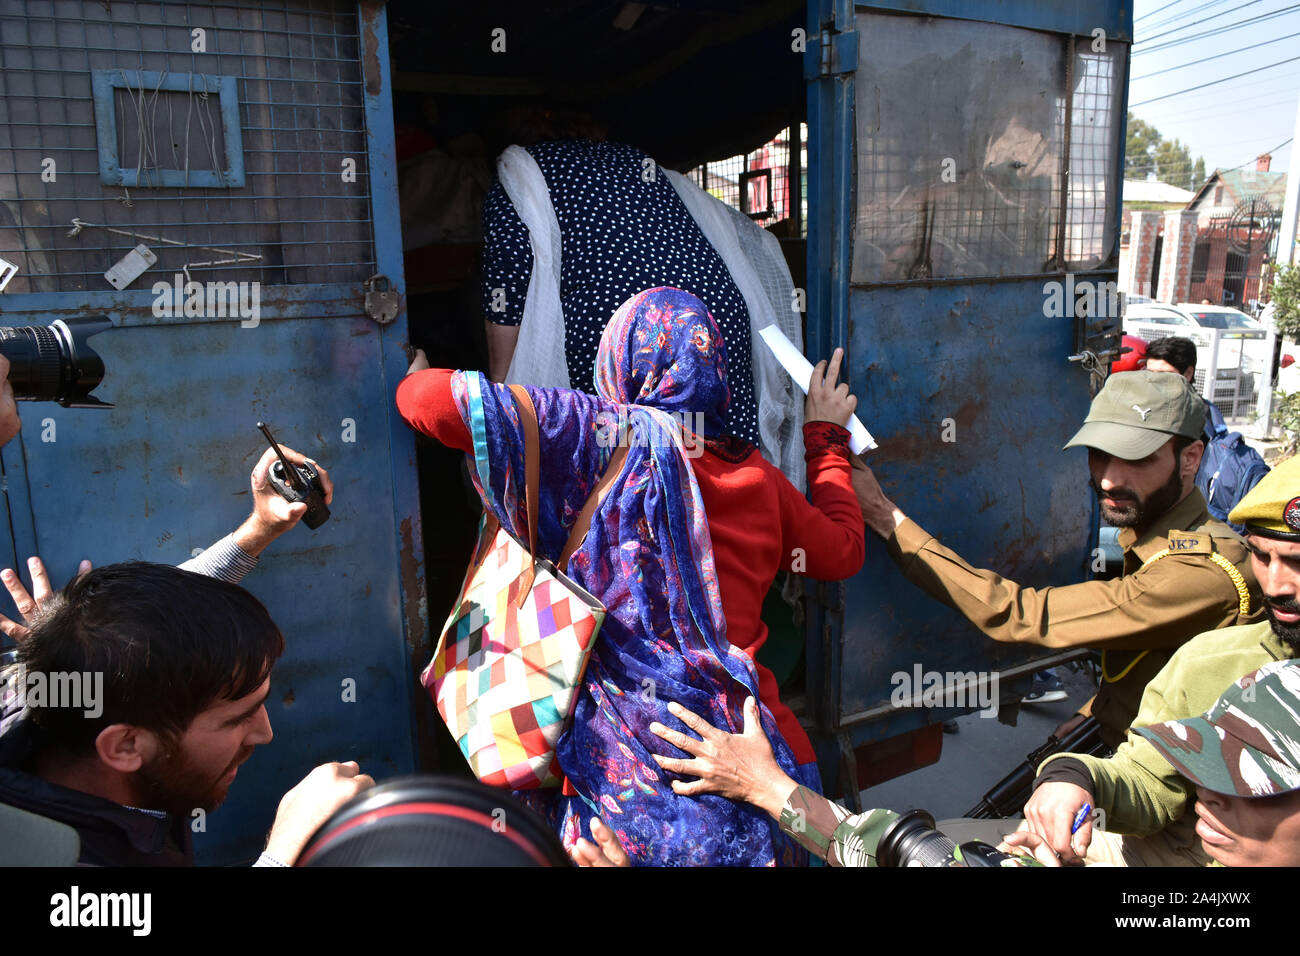 Government forces detain protesters during the demonstration.Women of Kashmir hold a protest against the abrogation of Article 370 by central government which grants special status to Jammu & Kashmir. Stock Photo